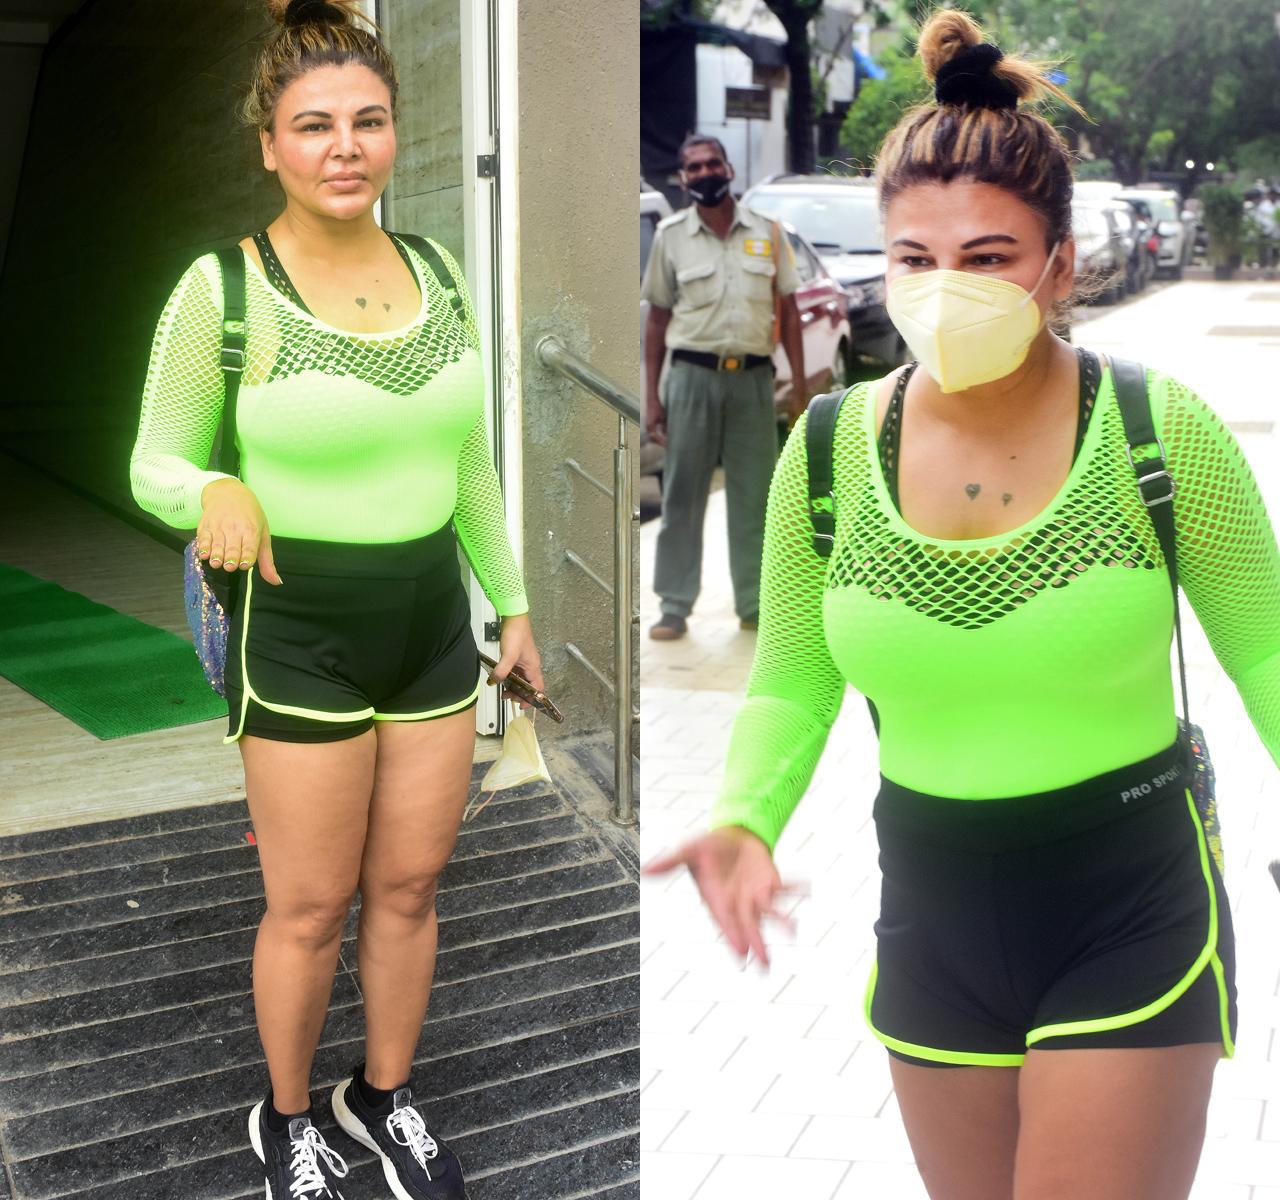 Rakhi Sawant was also snapped before hitting the gym in Andheri, Mumbai. She was seen clad in a fluorescent green mesh top, paired with black gym shorts and black shoes.